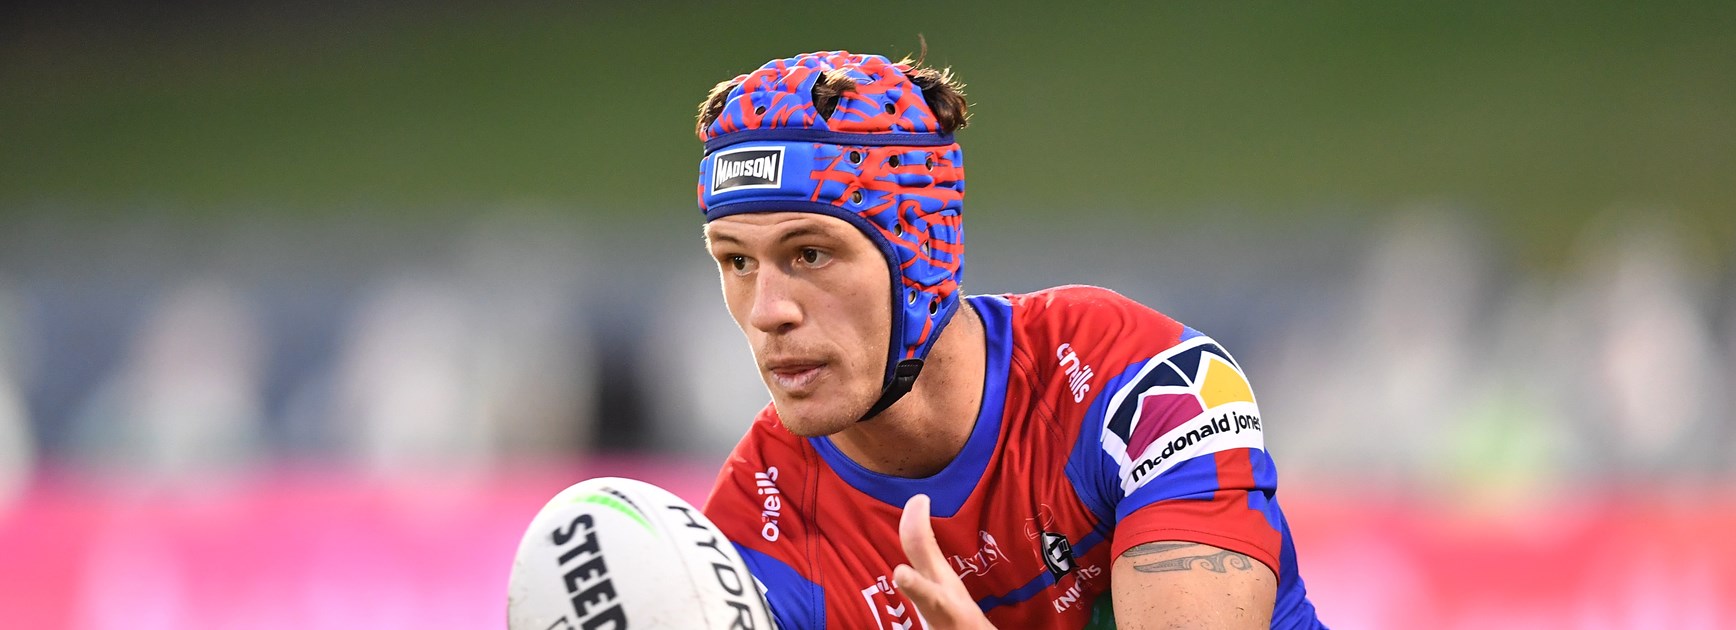 Fantasy: Ponga on fire in Campbelltown clash